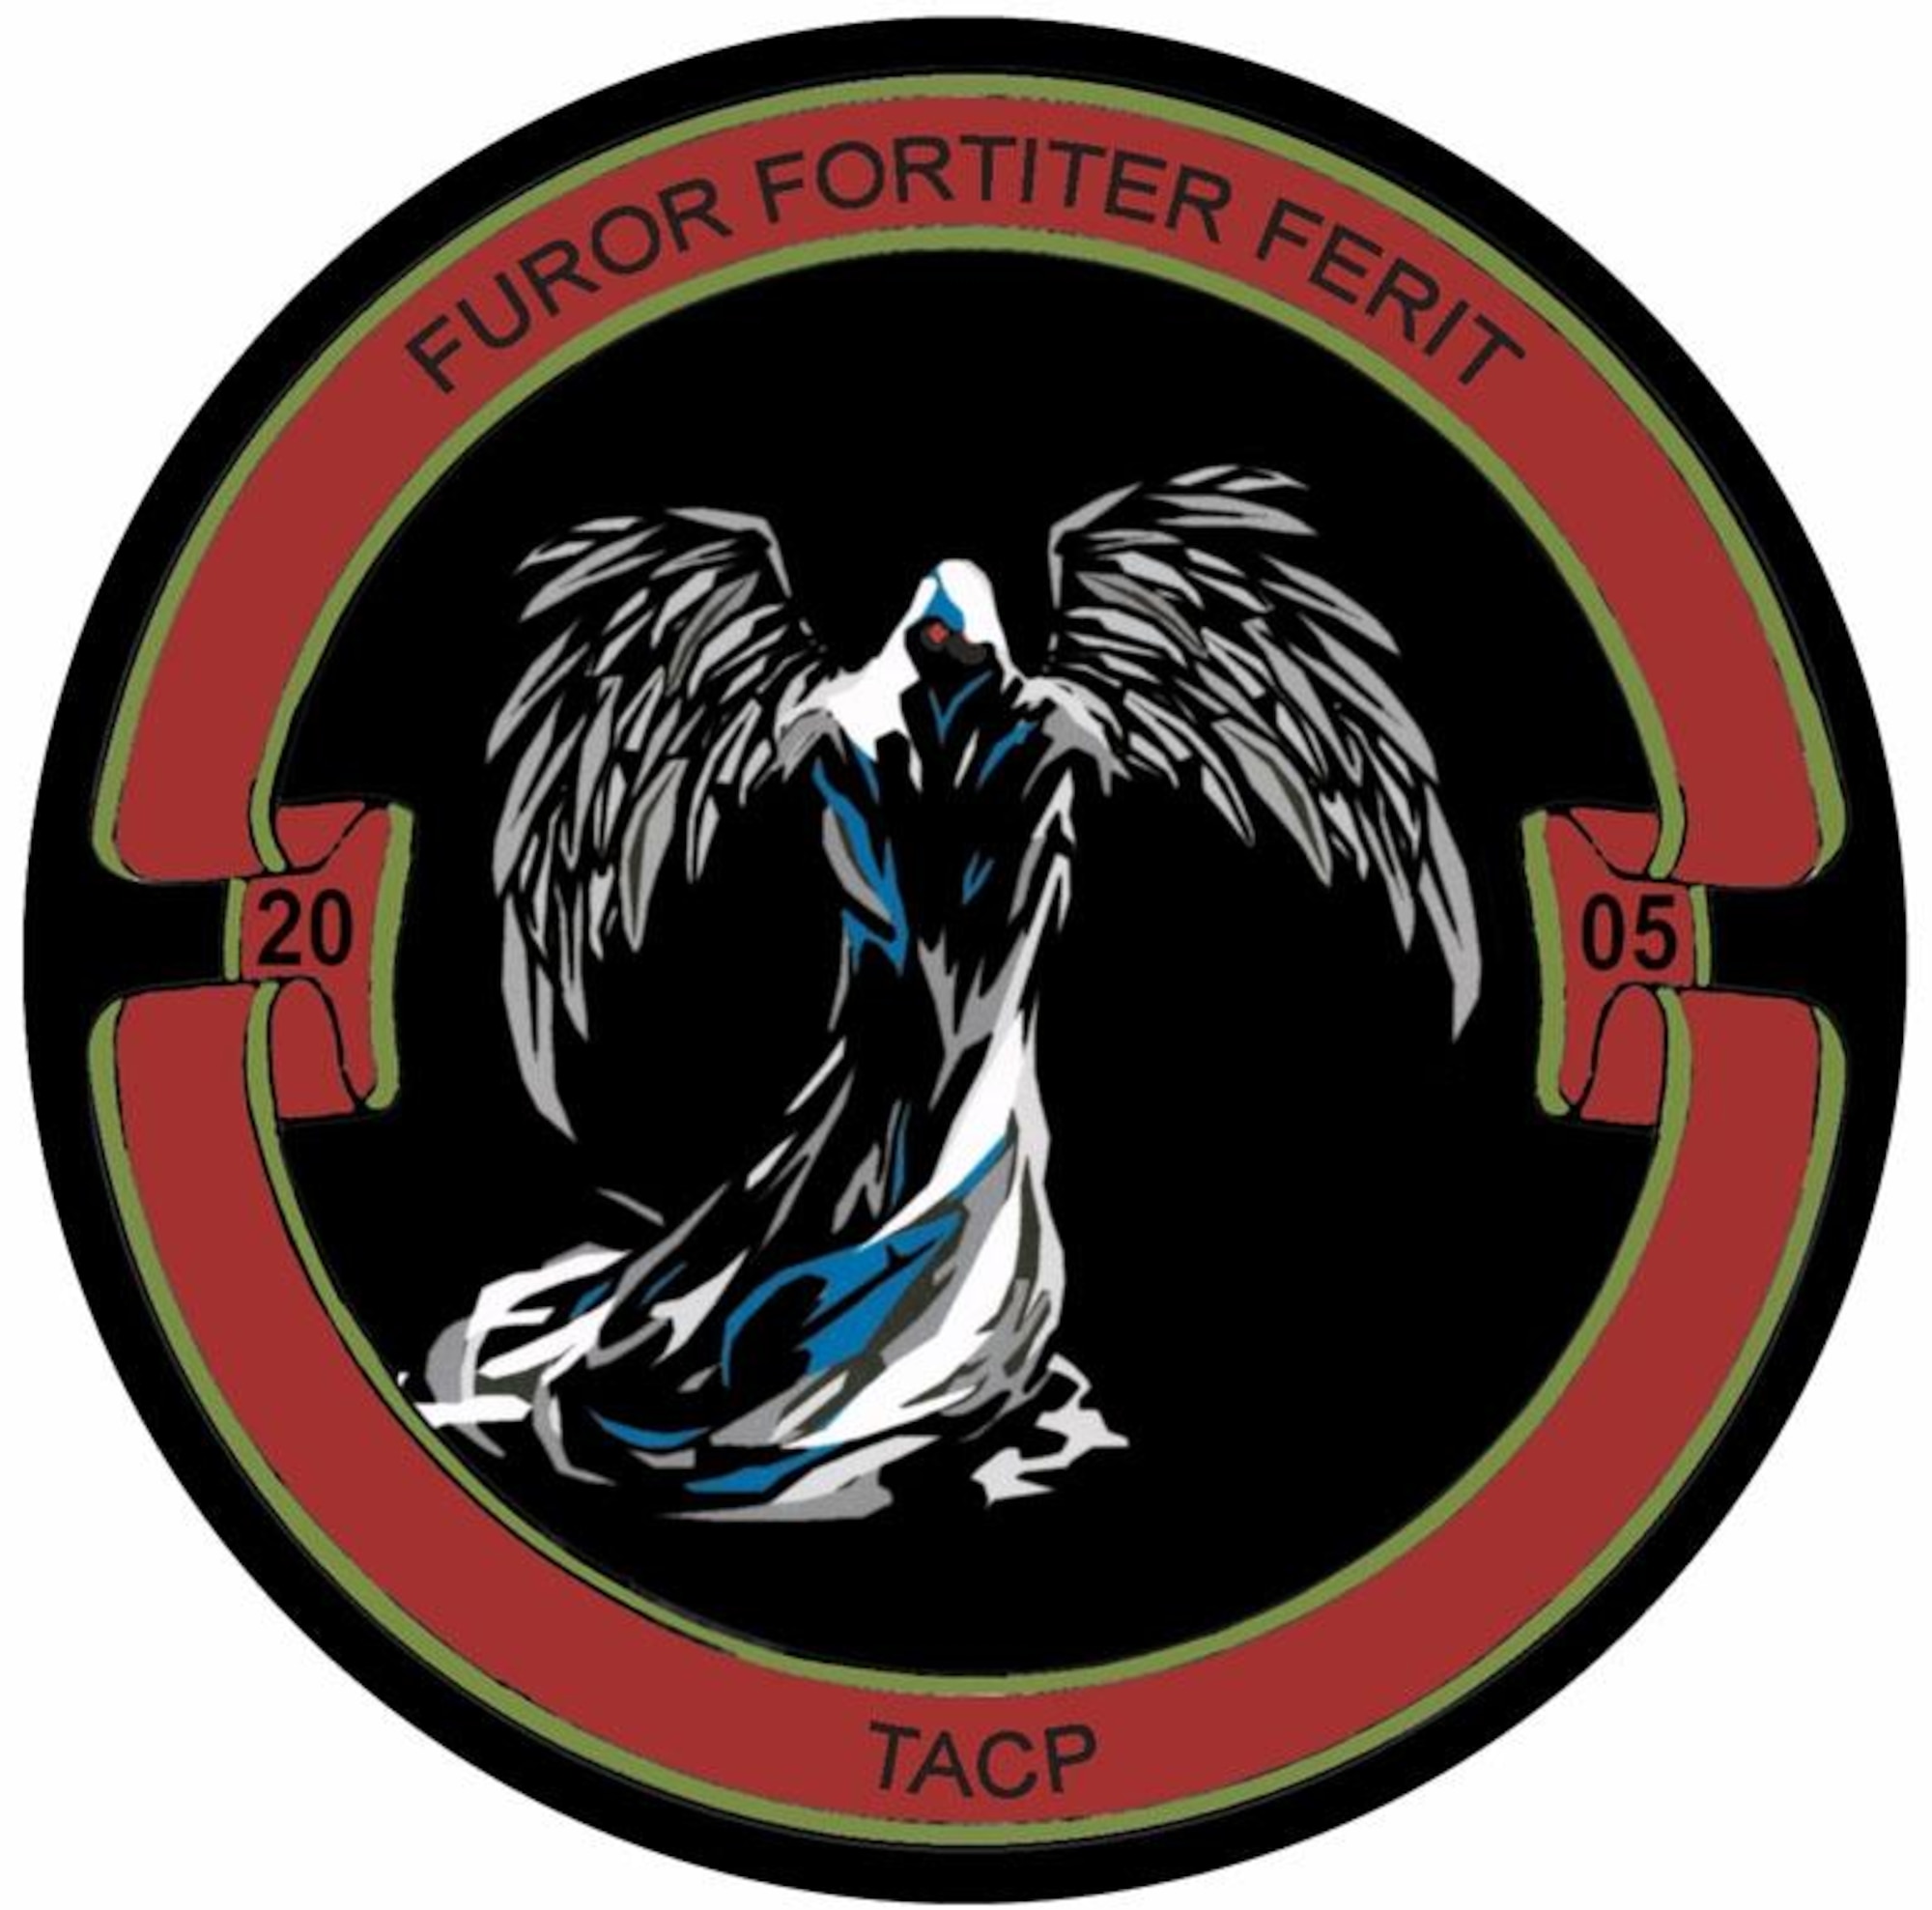 The unit seal for the Tactical Air Control Party battery at Varde, Denmark. Danish JTACs are participating in Atlantic Strike VI, a U.S. Central Command Air Forces-sponsored exercise focused on improving air-ground coordination during urban close air support operations. The slogan translates to "our anger hits you hard." (Courtesy Photo)